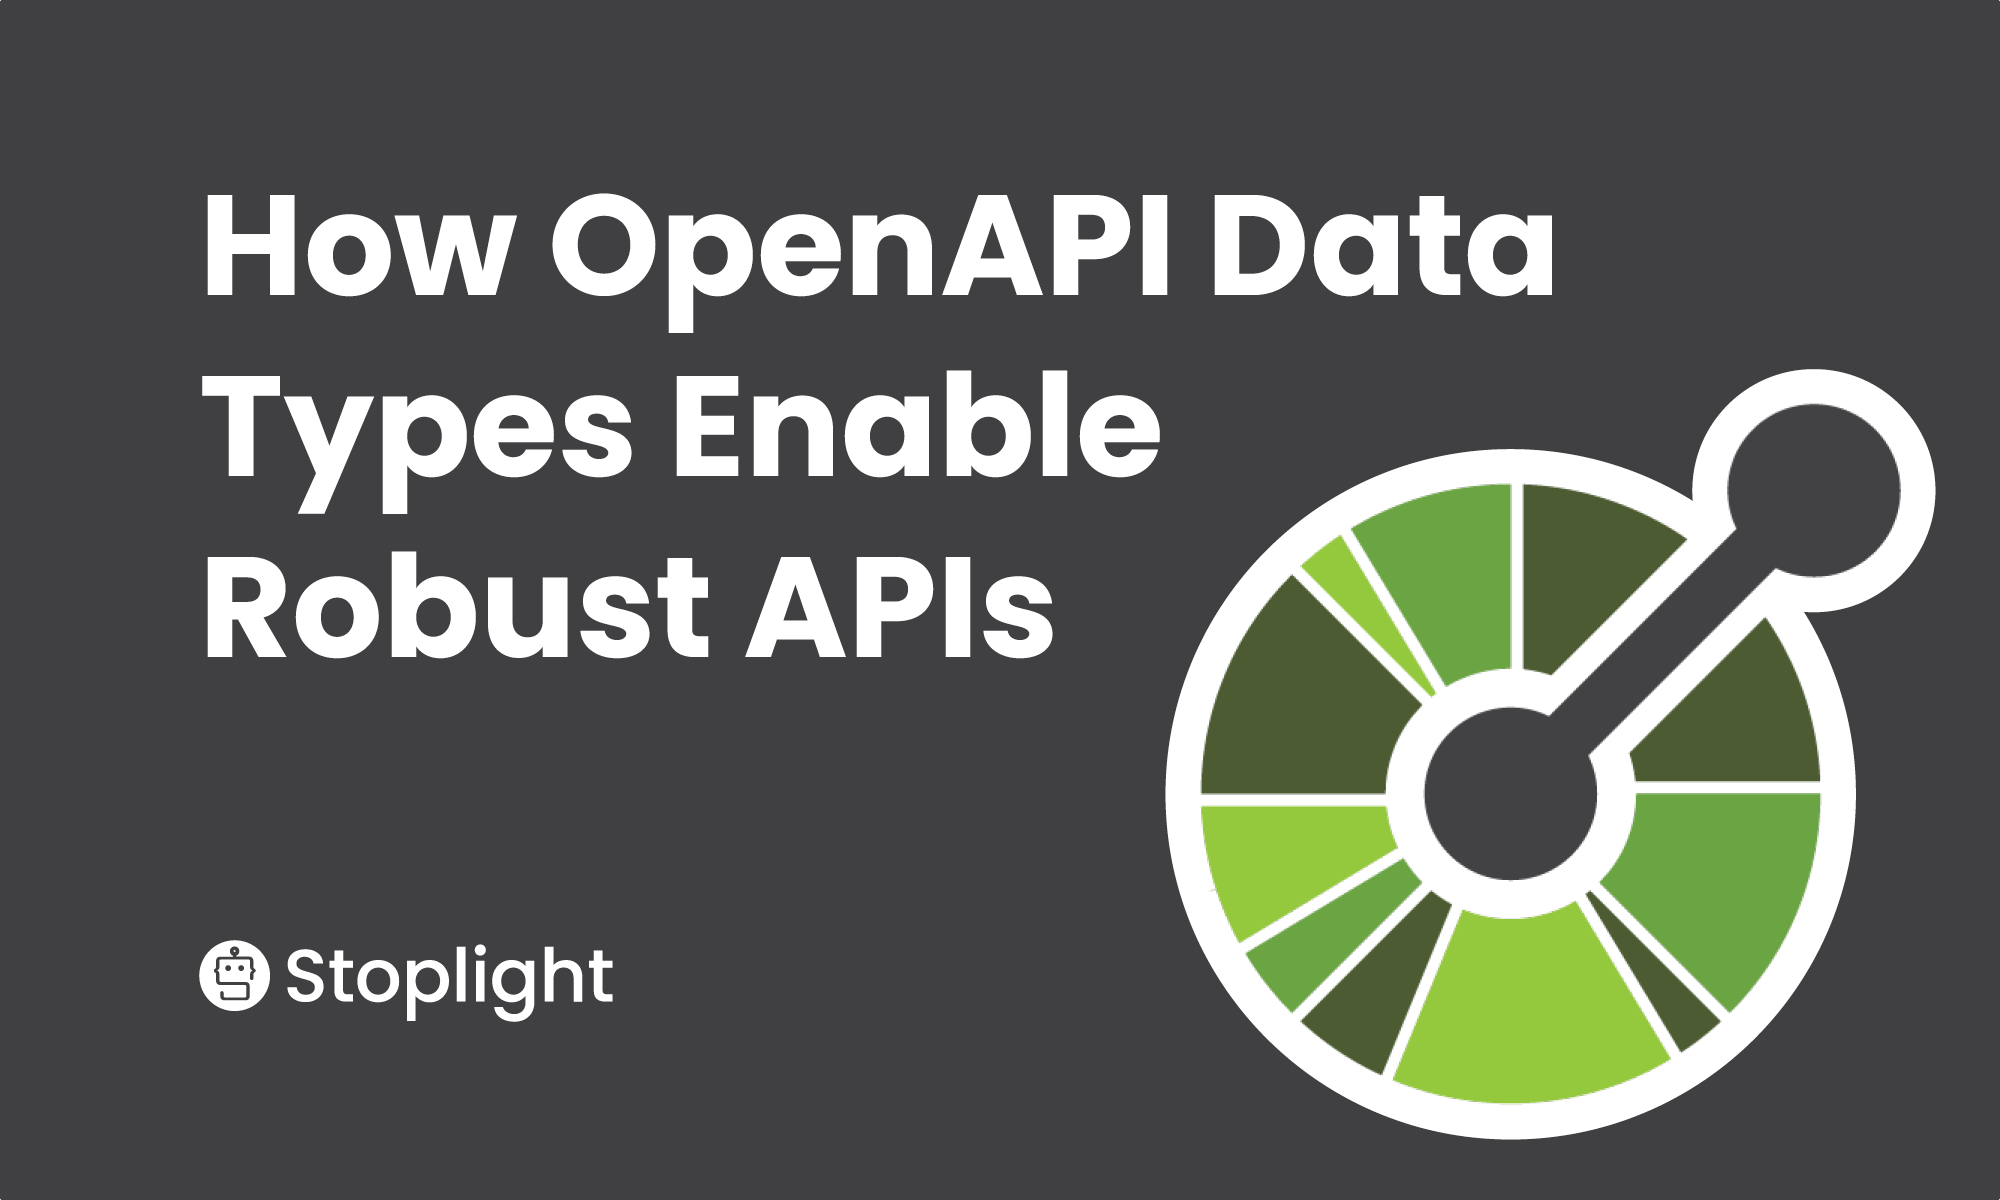 How OpenAPI Data Types Enable Robust APIs